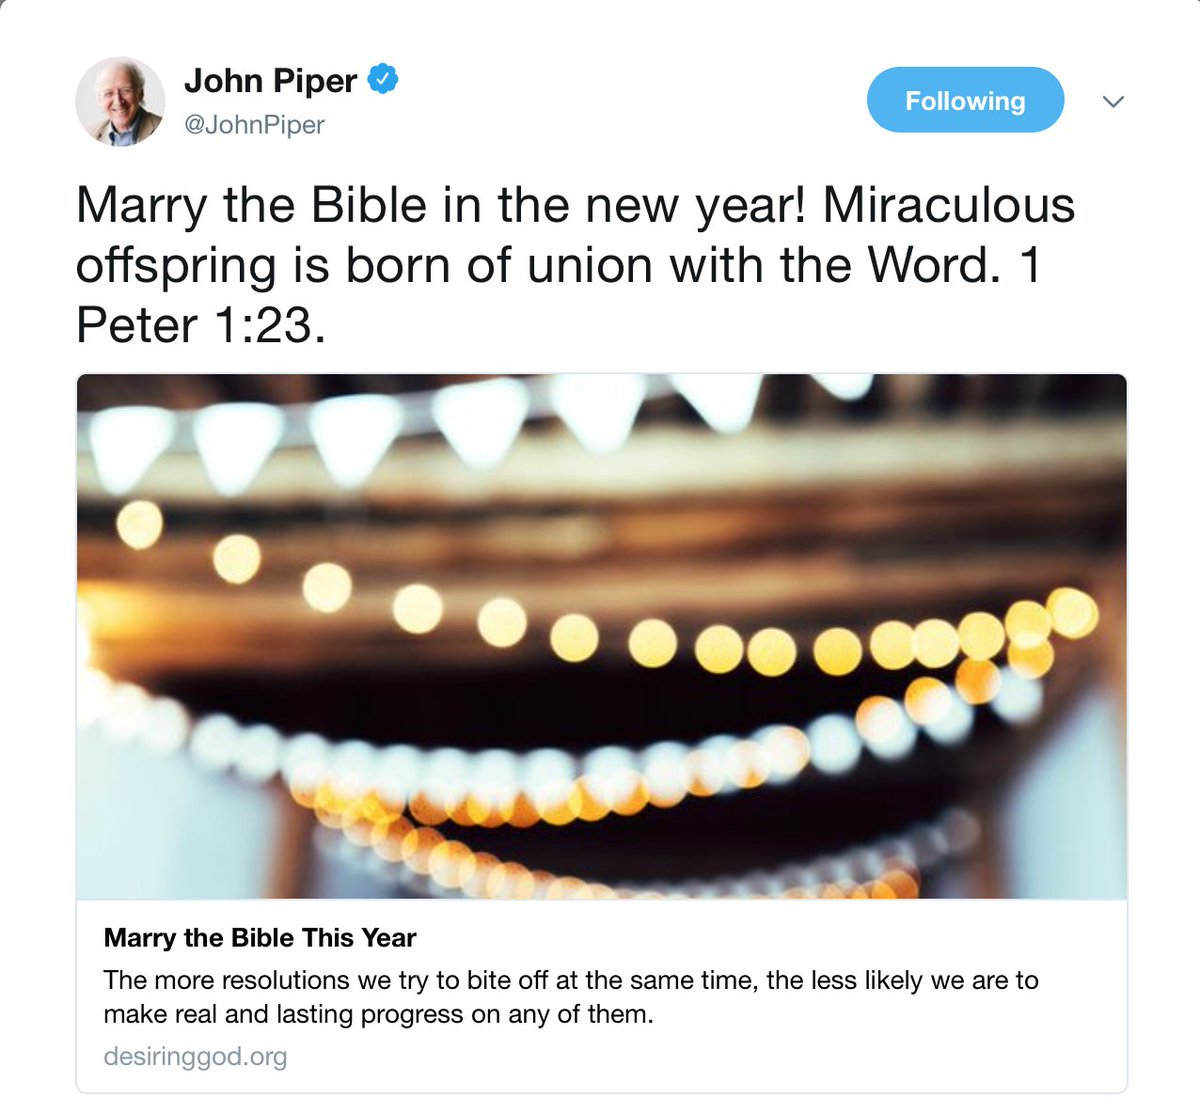 "I know we originally said we wanted John Piper to officiate the wedding," you remark, having just looked up and remembered this, "but the more I think about it, maybe we shouldn't invite him. He's got some really weird views on what 'biblical marriage' means…"